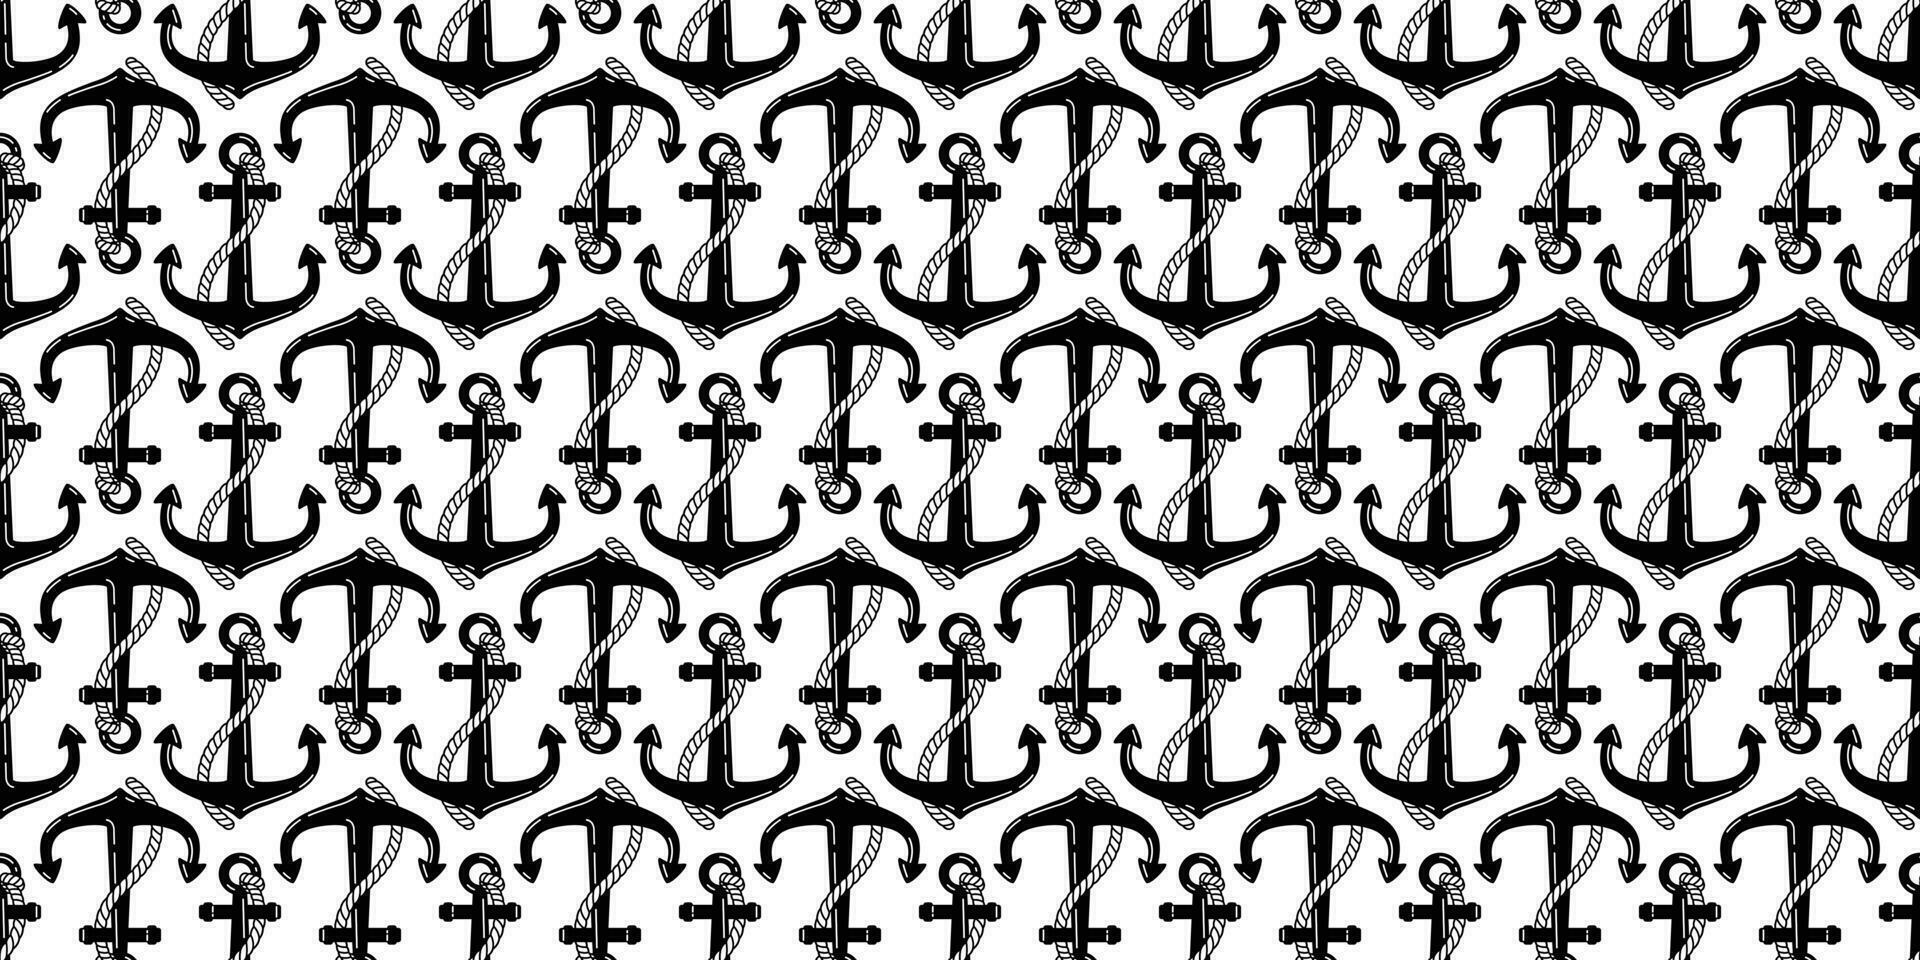 Anchor seamless pattern boat vector isolated pirate helm Nautical maritime ocean sea repeat wallpaper tile background illustration